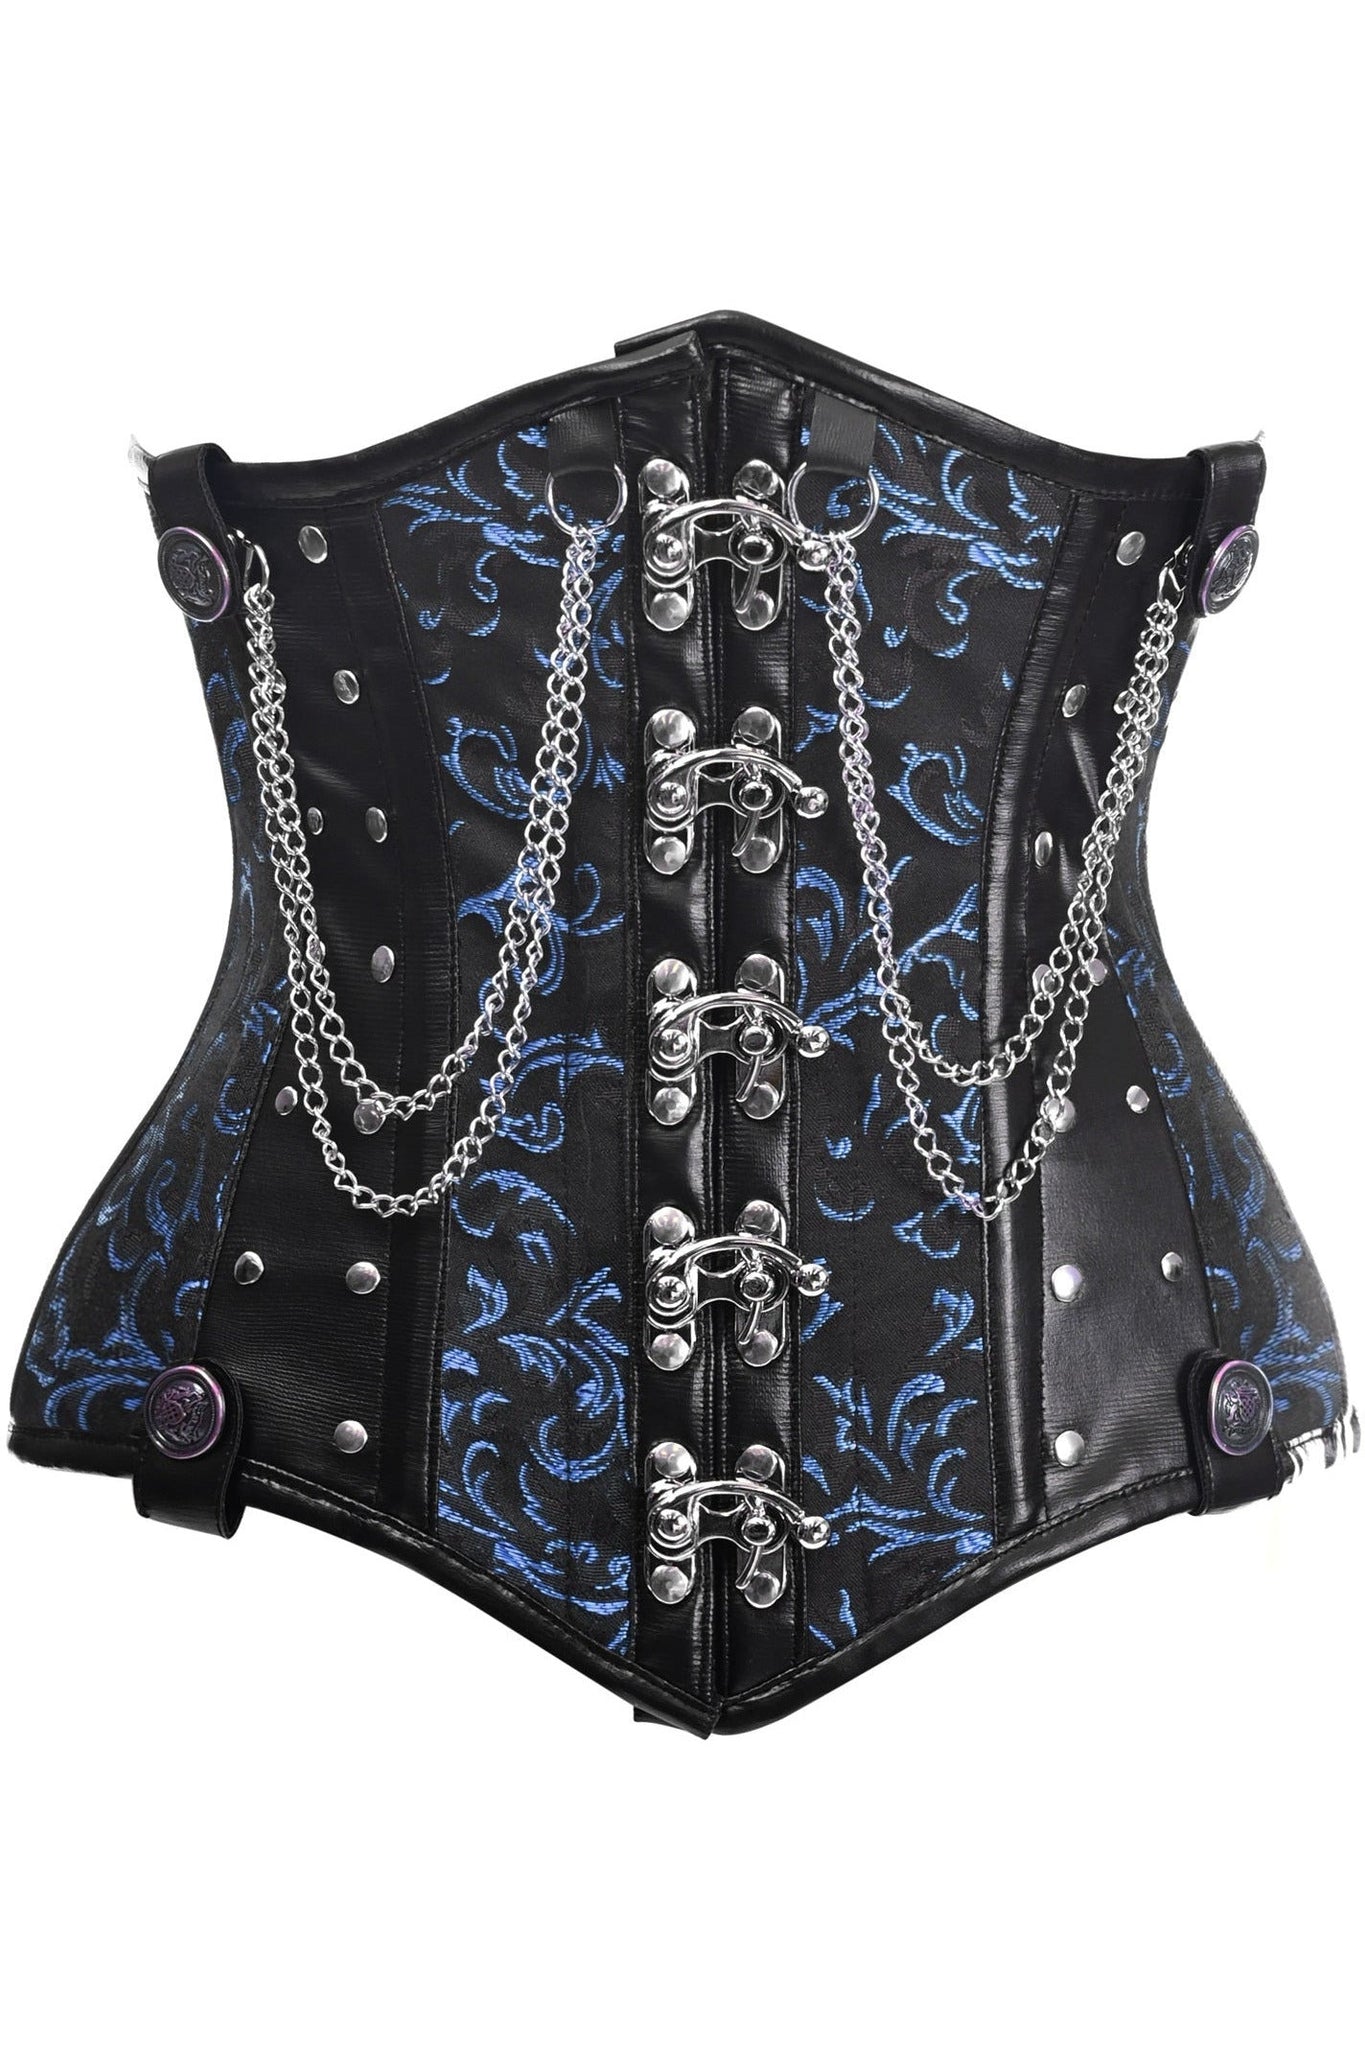 Top Drawer Black and Blue Steel Boned Underbust Corset with Chains and Clasps by Daisy Corsets in Size S, M, L, XL, 2X, 3X, 4X, 5X, or 6X